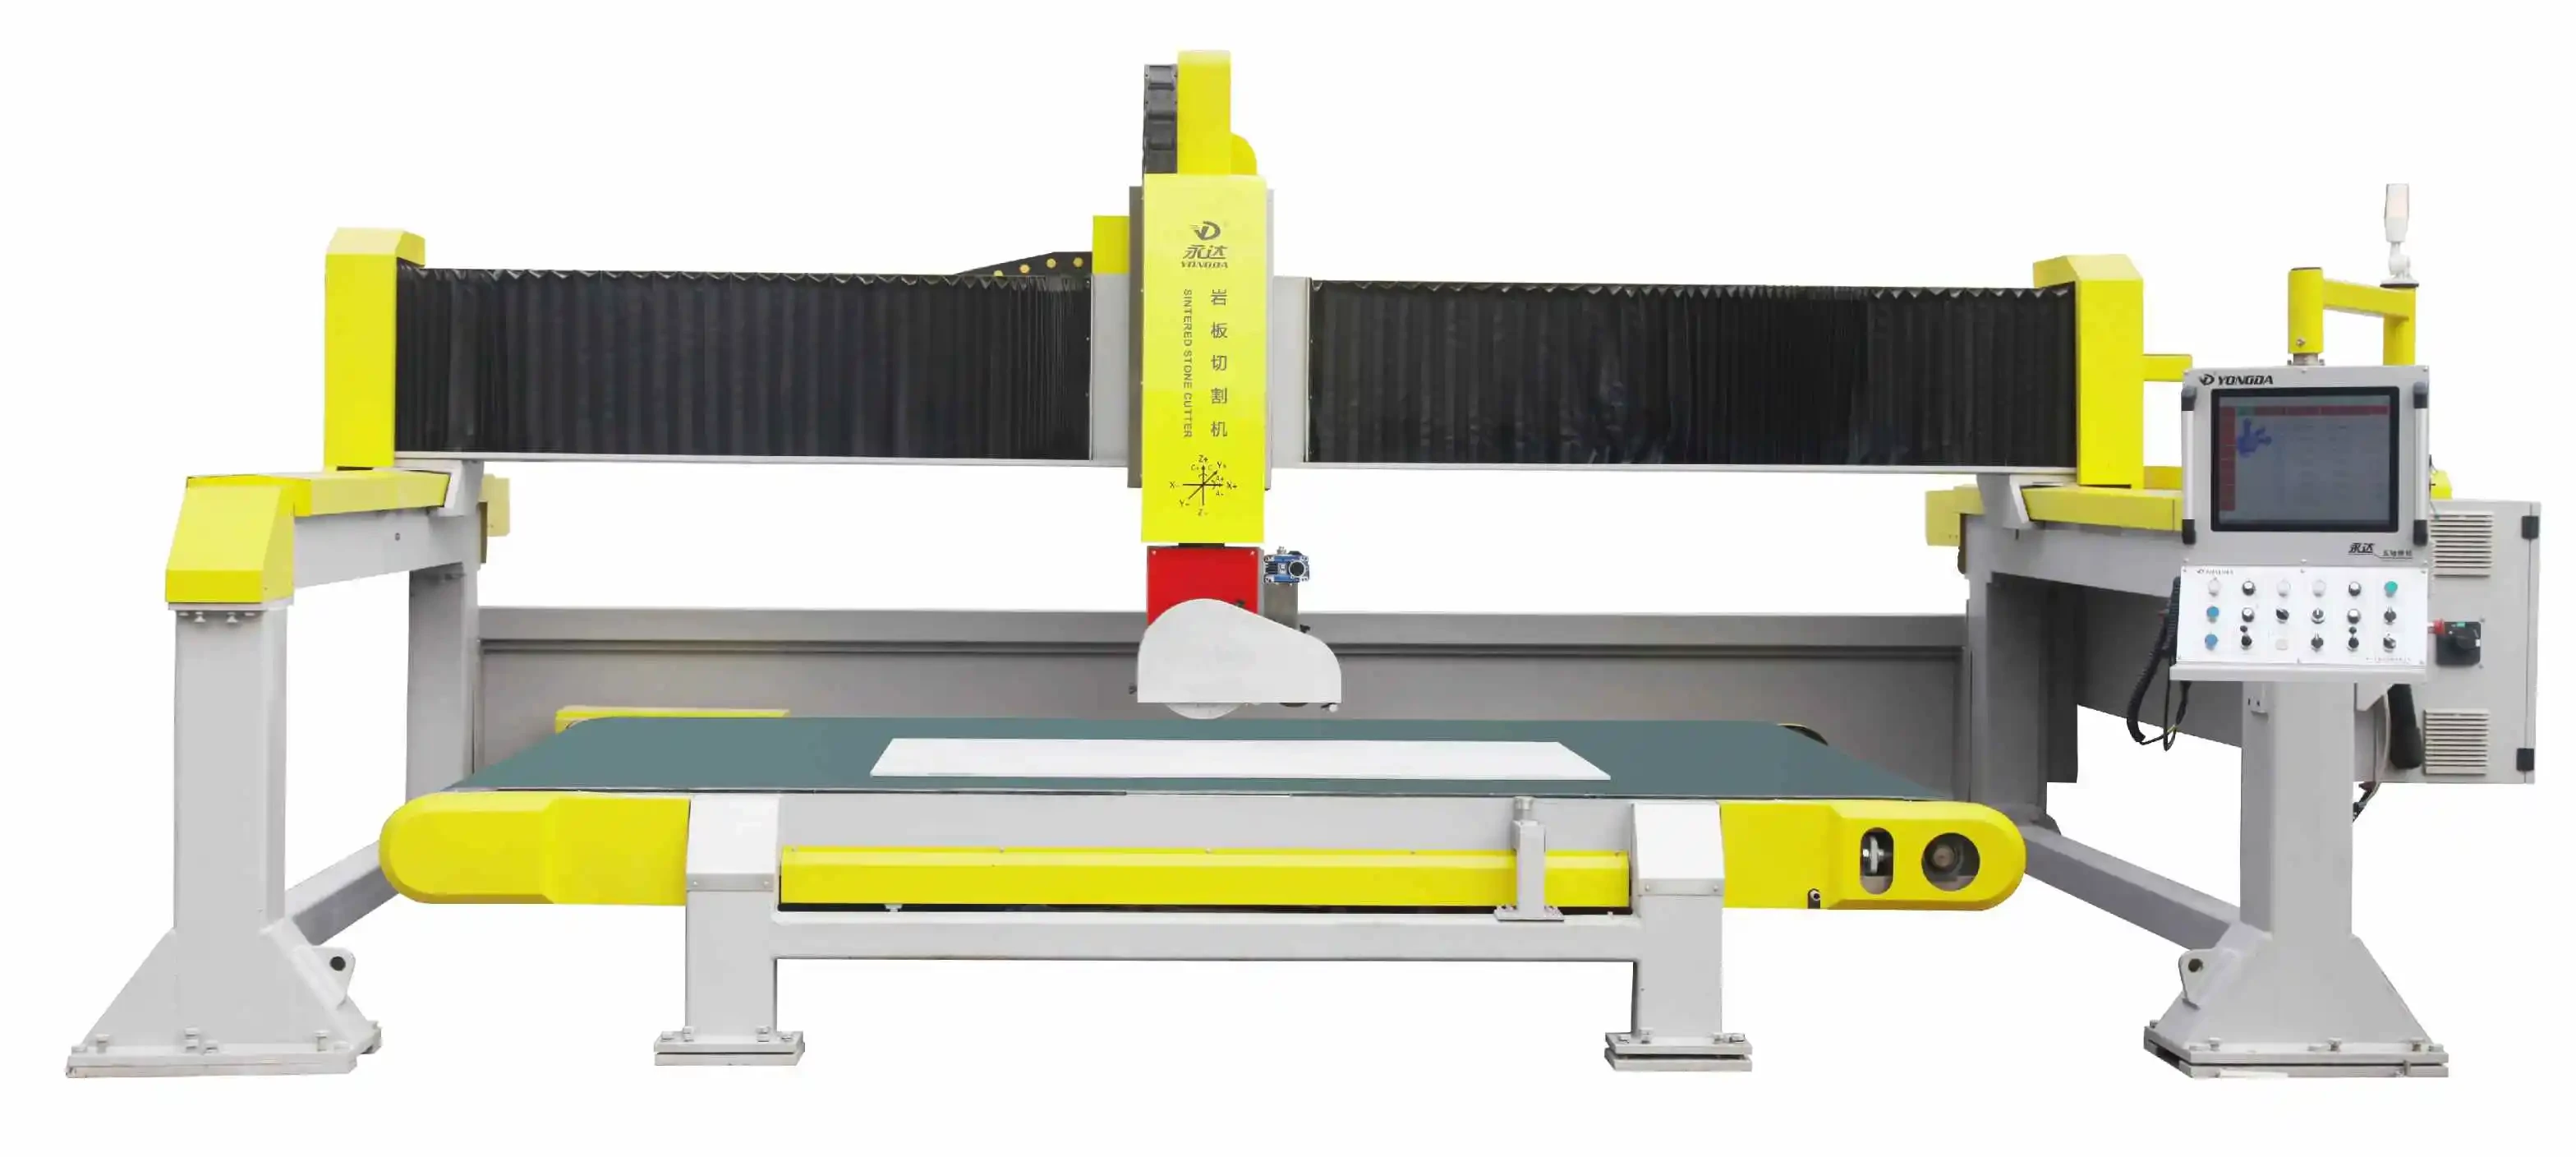 What Are the Applications of Bridge Cutting Machines?